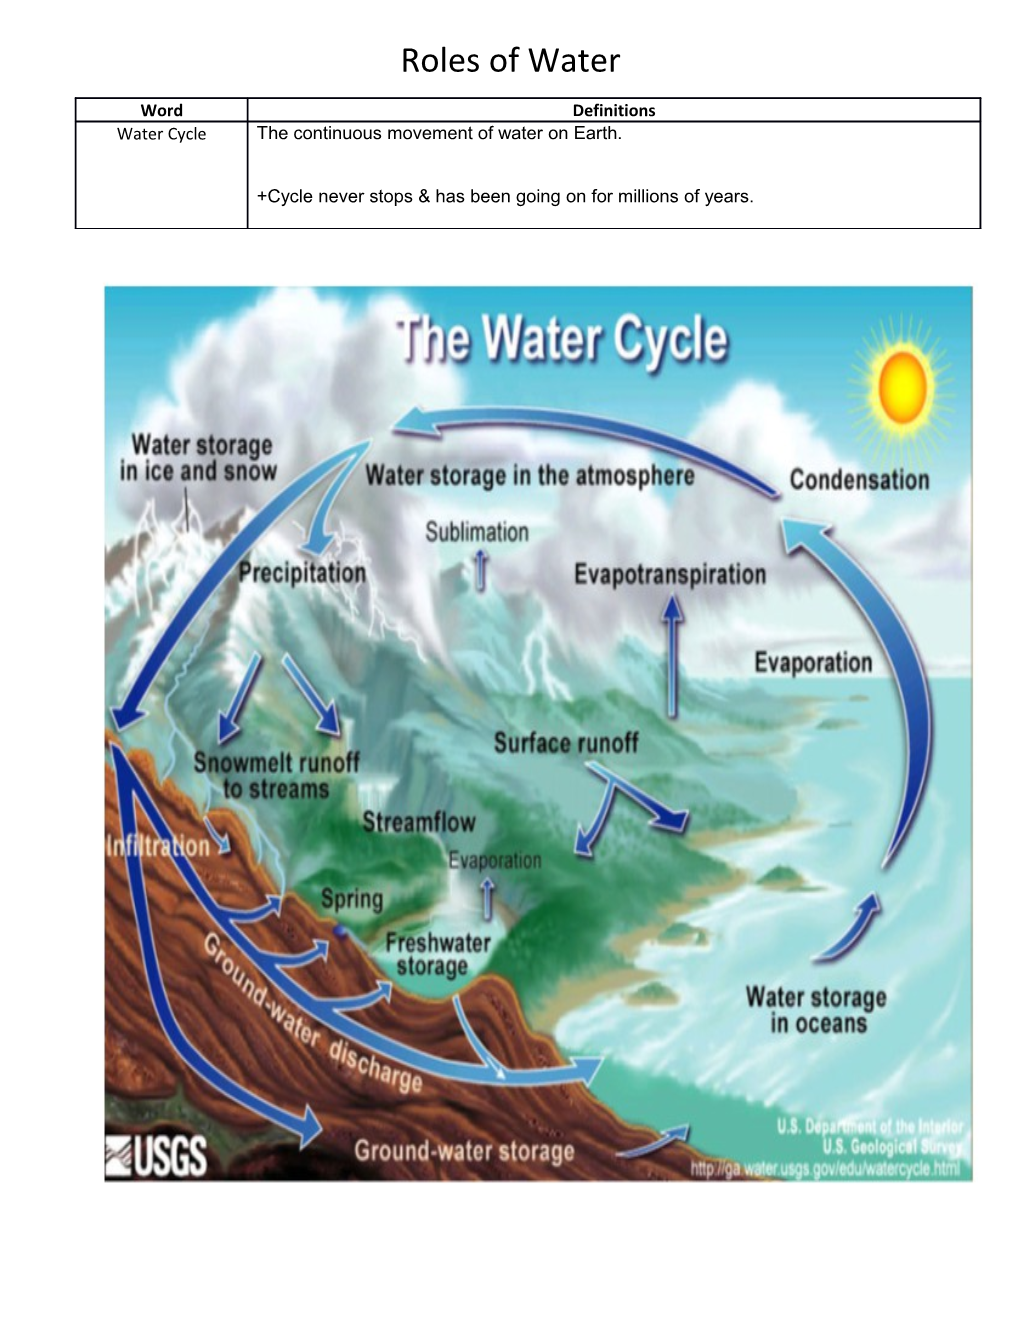 Roles of Water